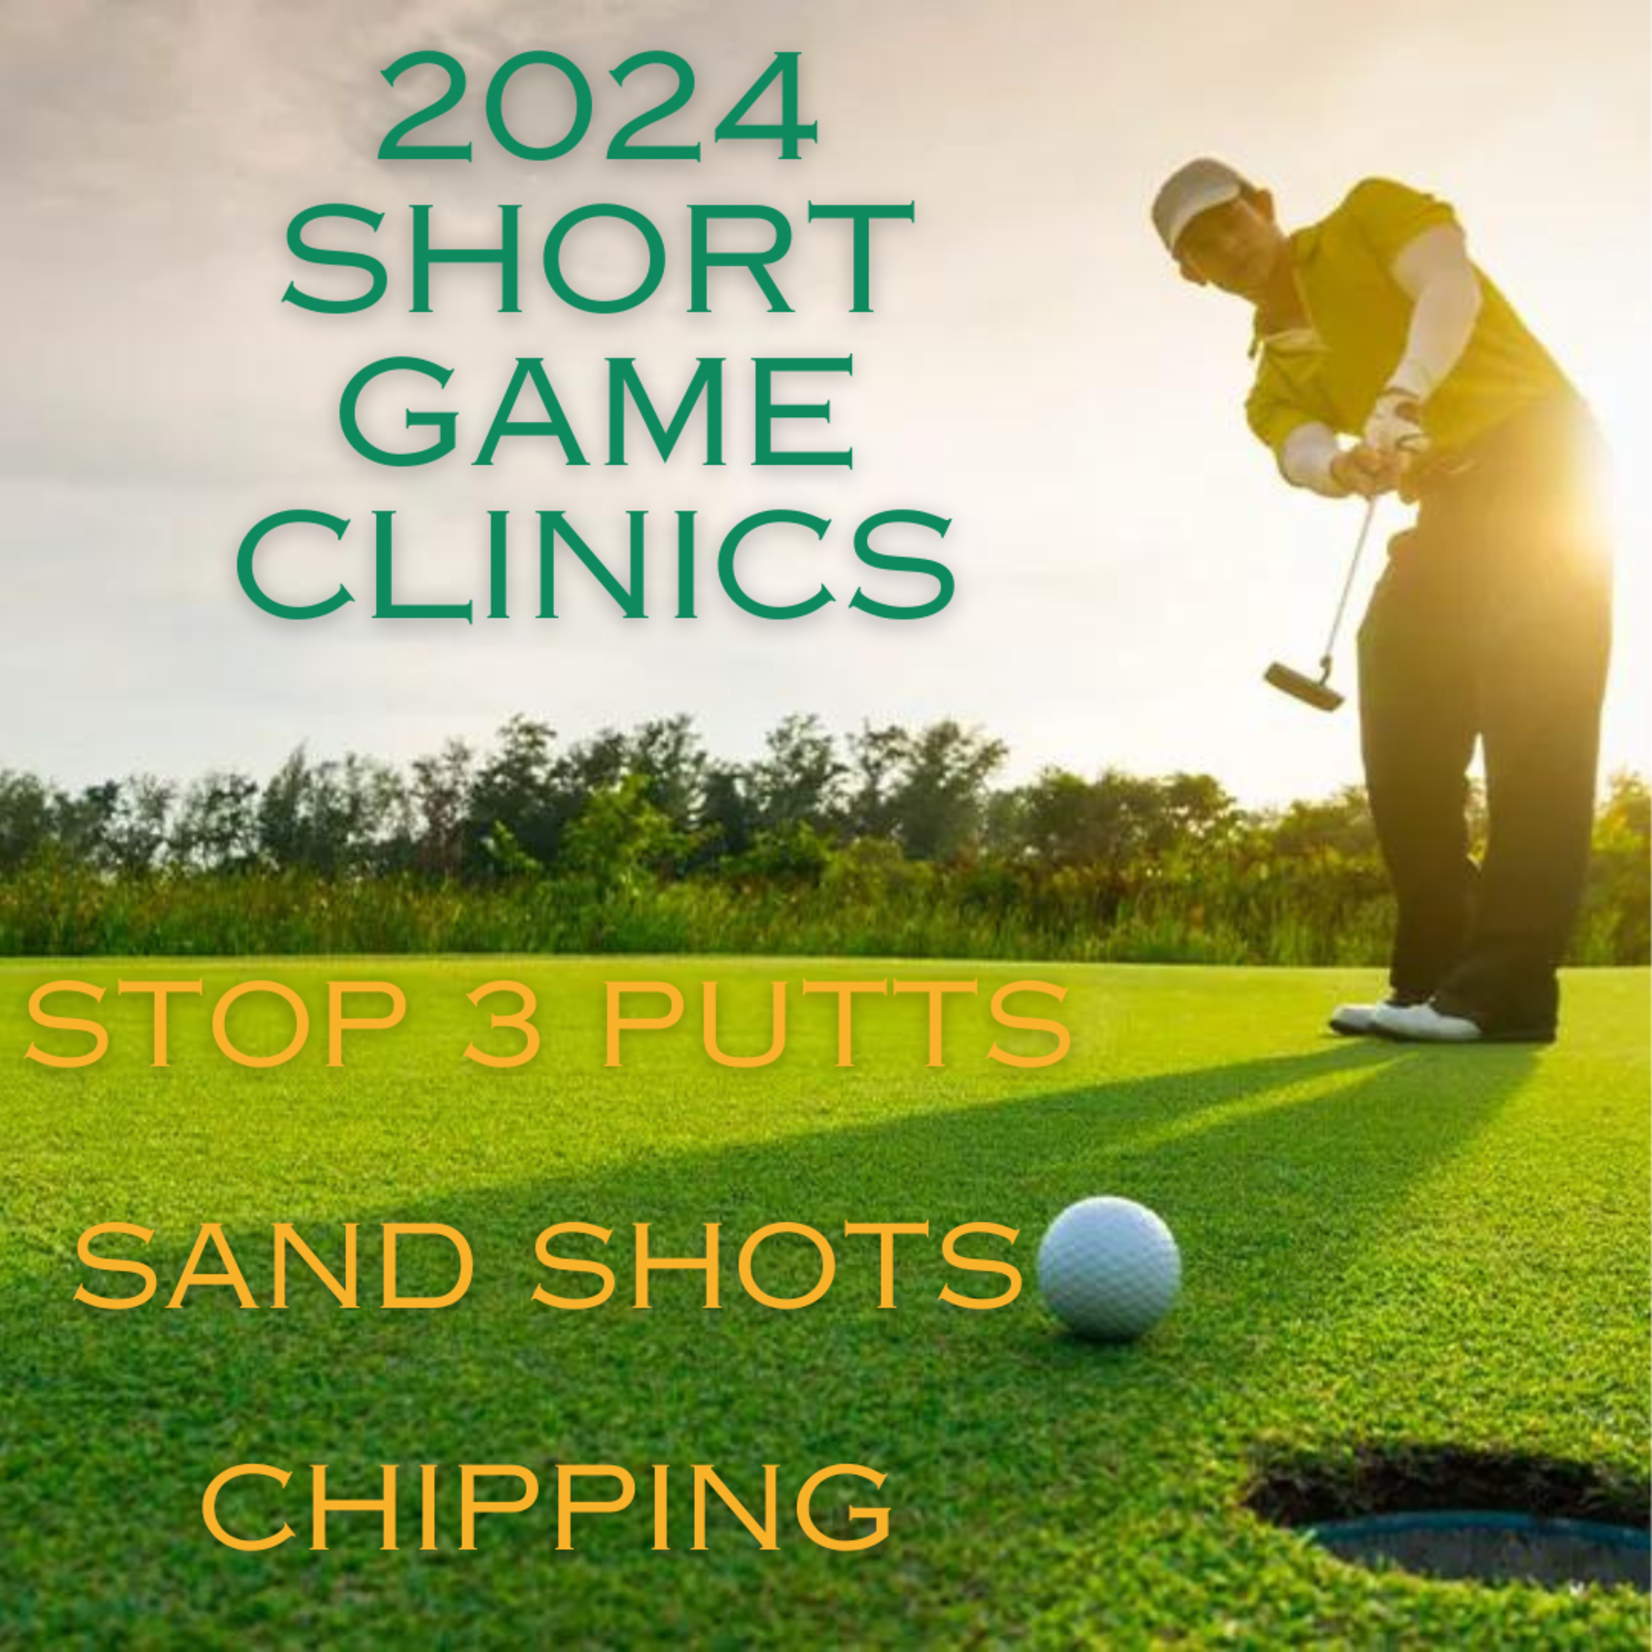 2024 Short Game Clinic #6 Saturday August 10th 11am-1pm